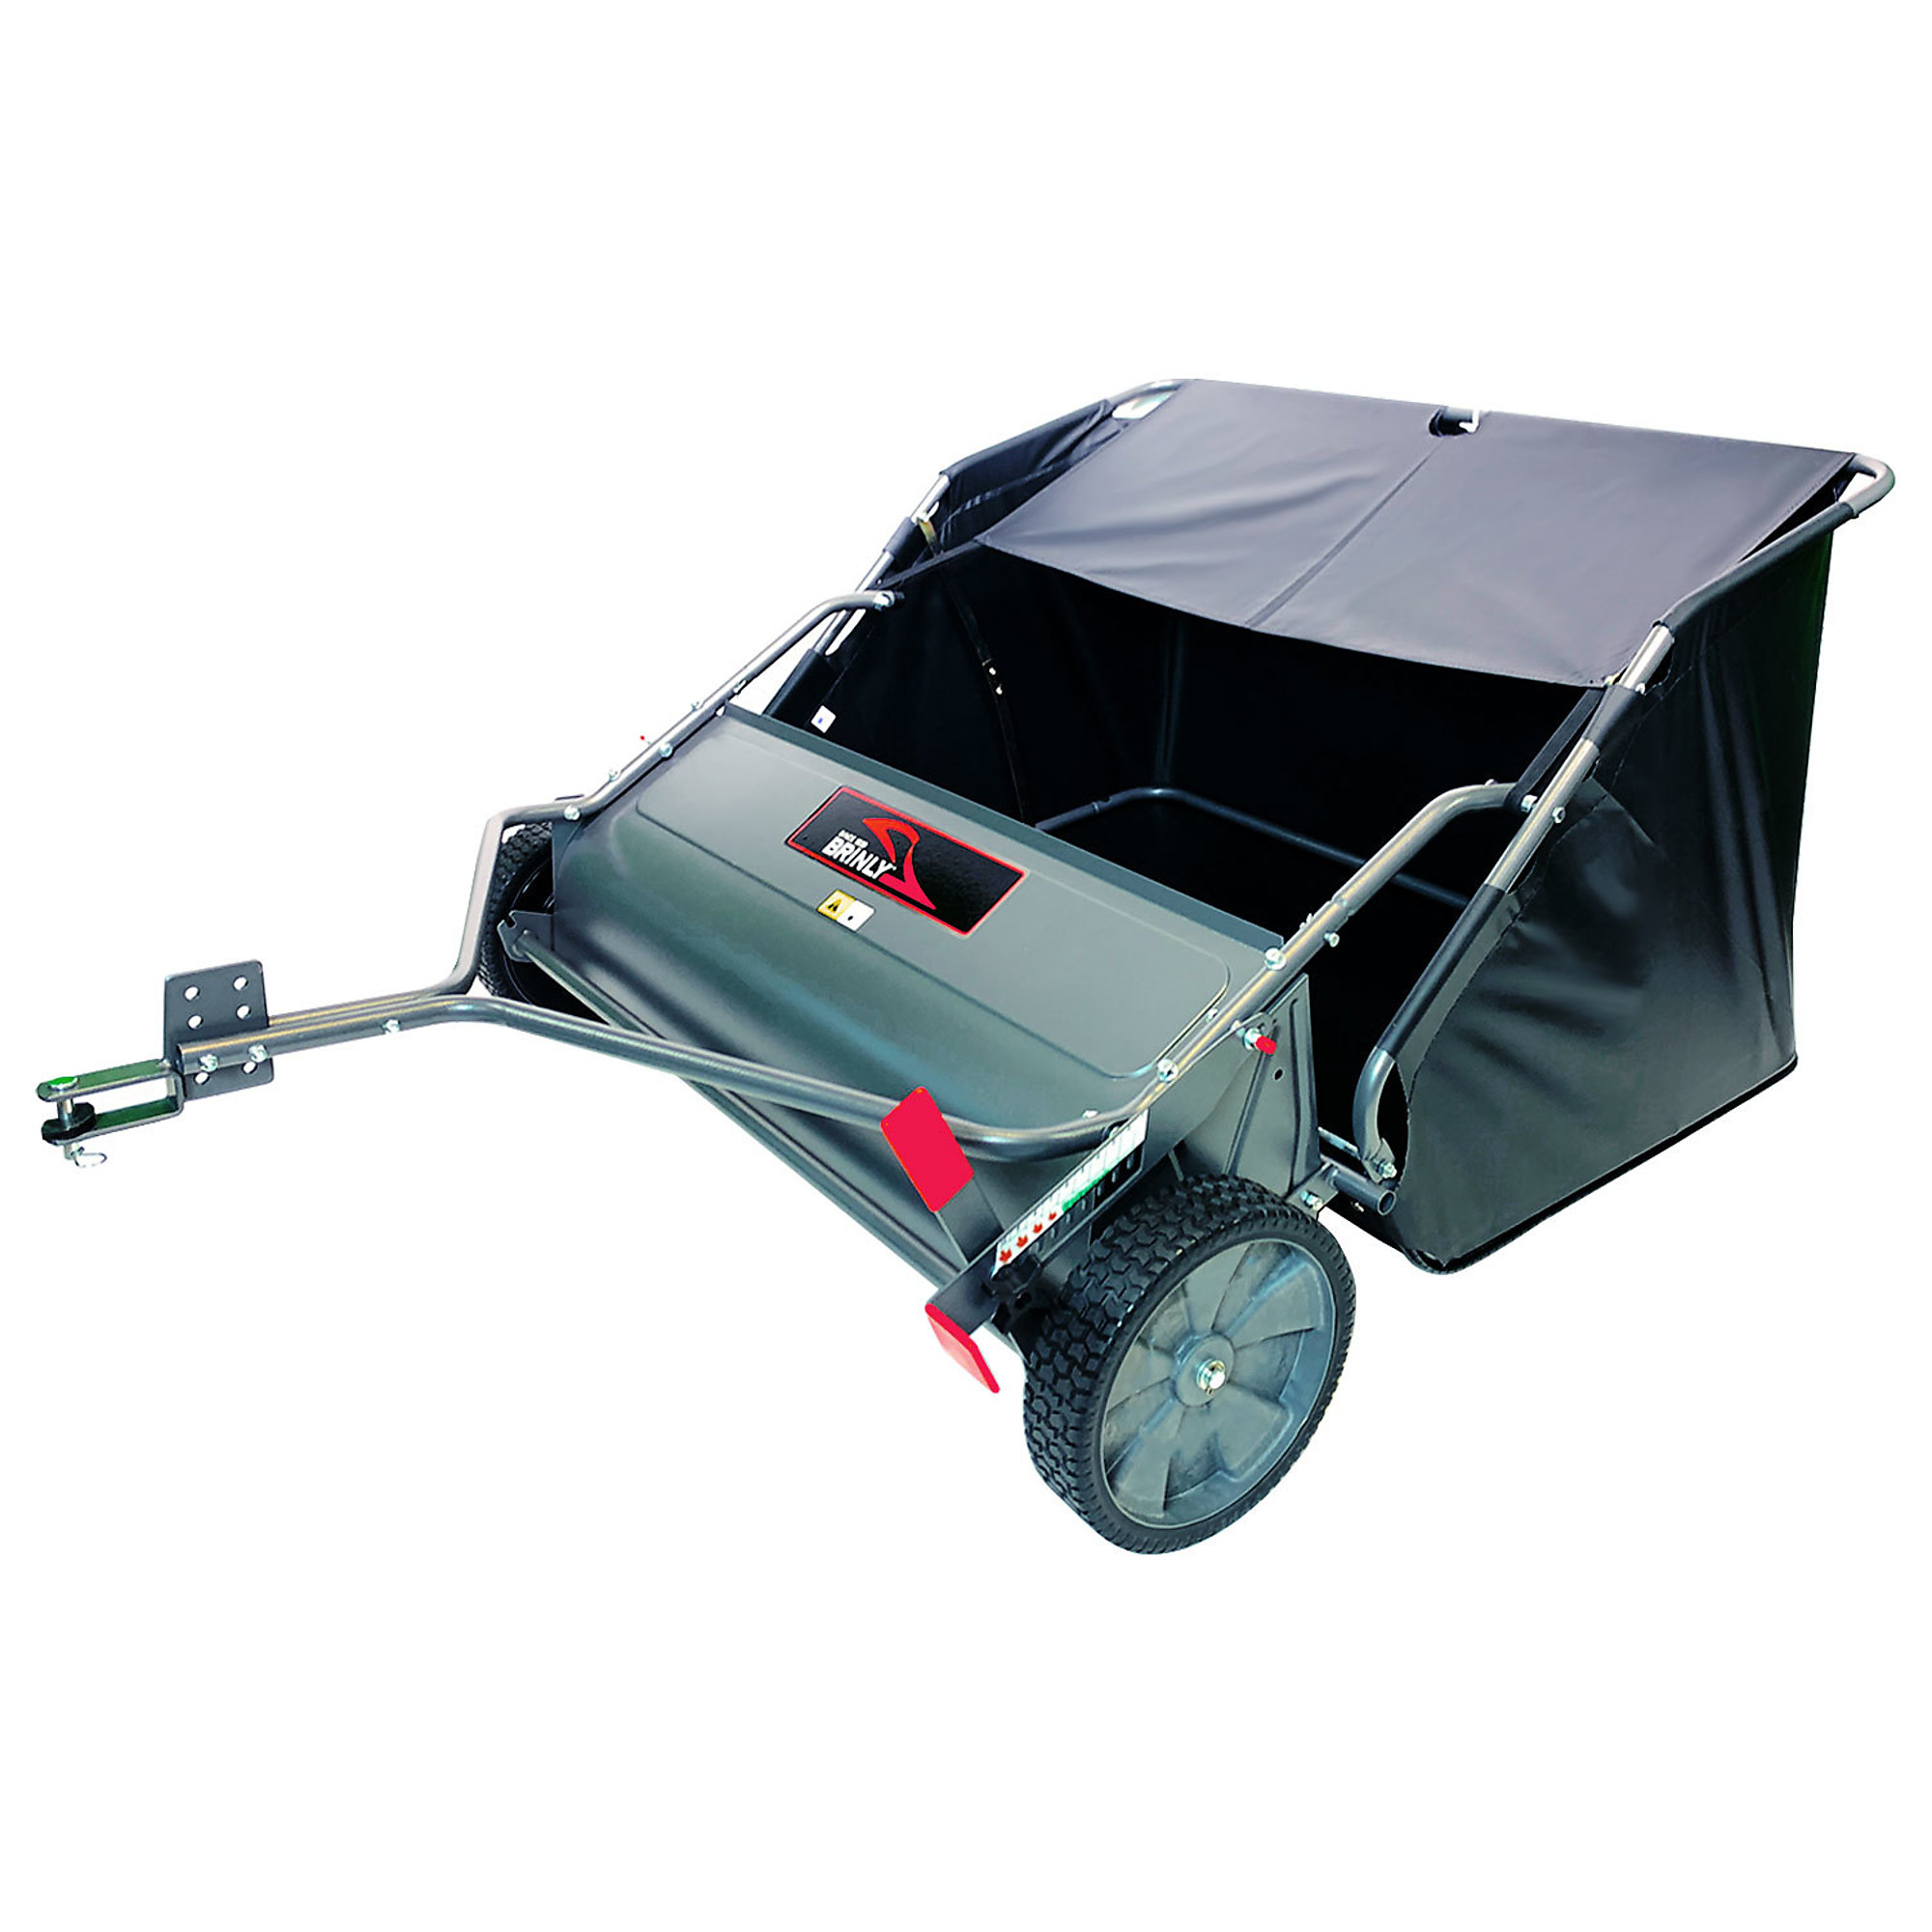 Brinly-Hardy, 42Inch Lawn Sweeper in Hammered Gunmetal, Working Width 42 in, Hopper Capacity 20 ftÂ³, Model LS2-42BH-S